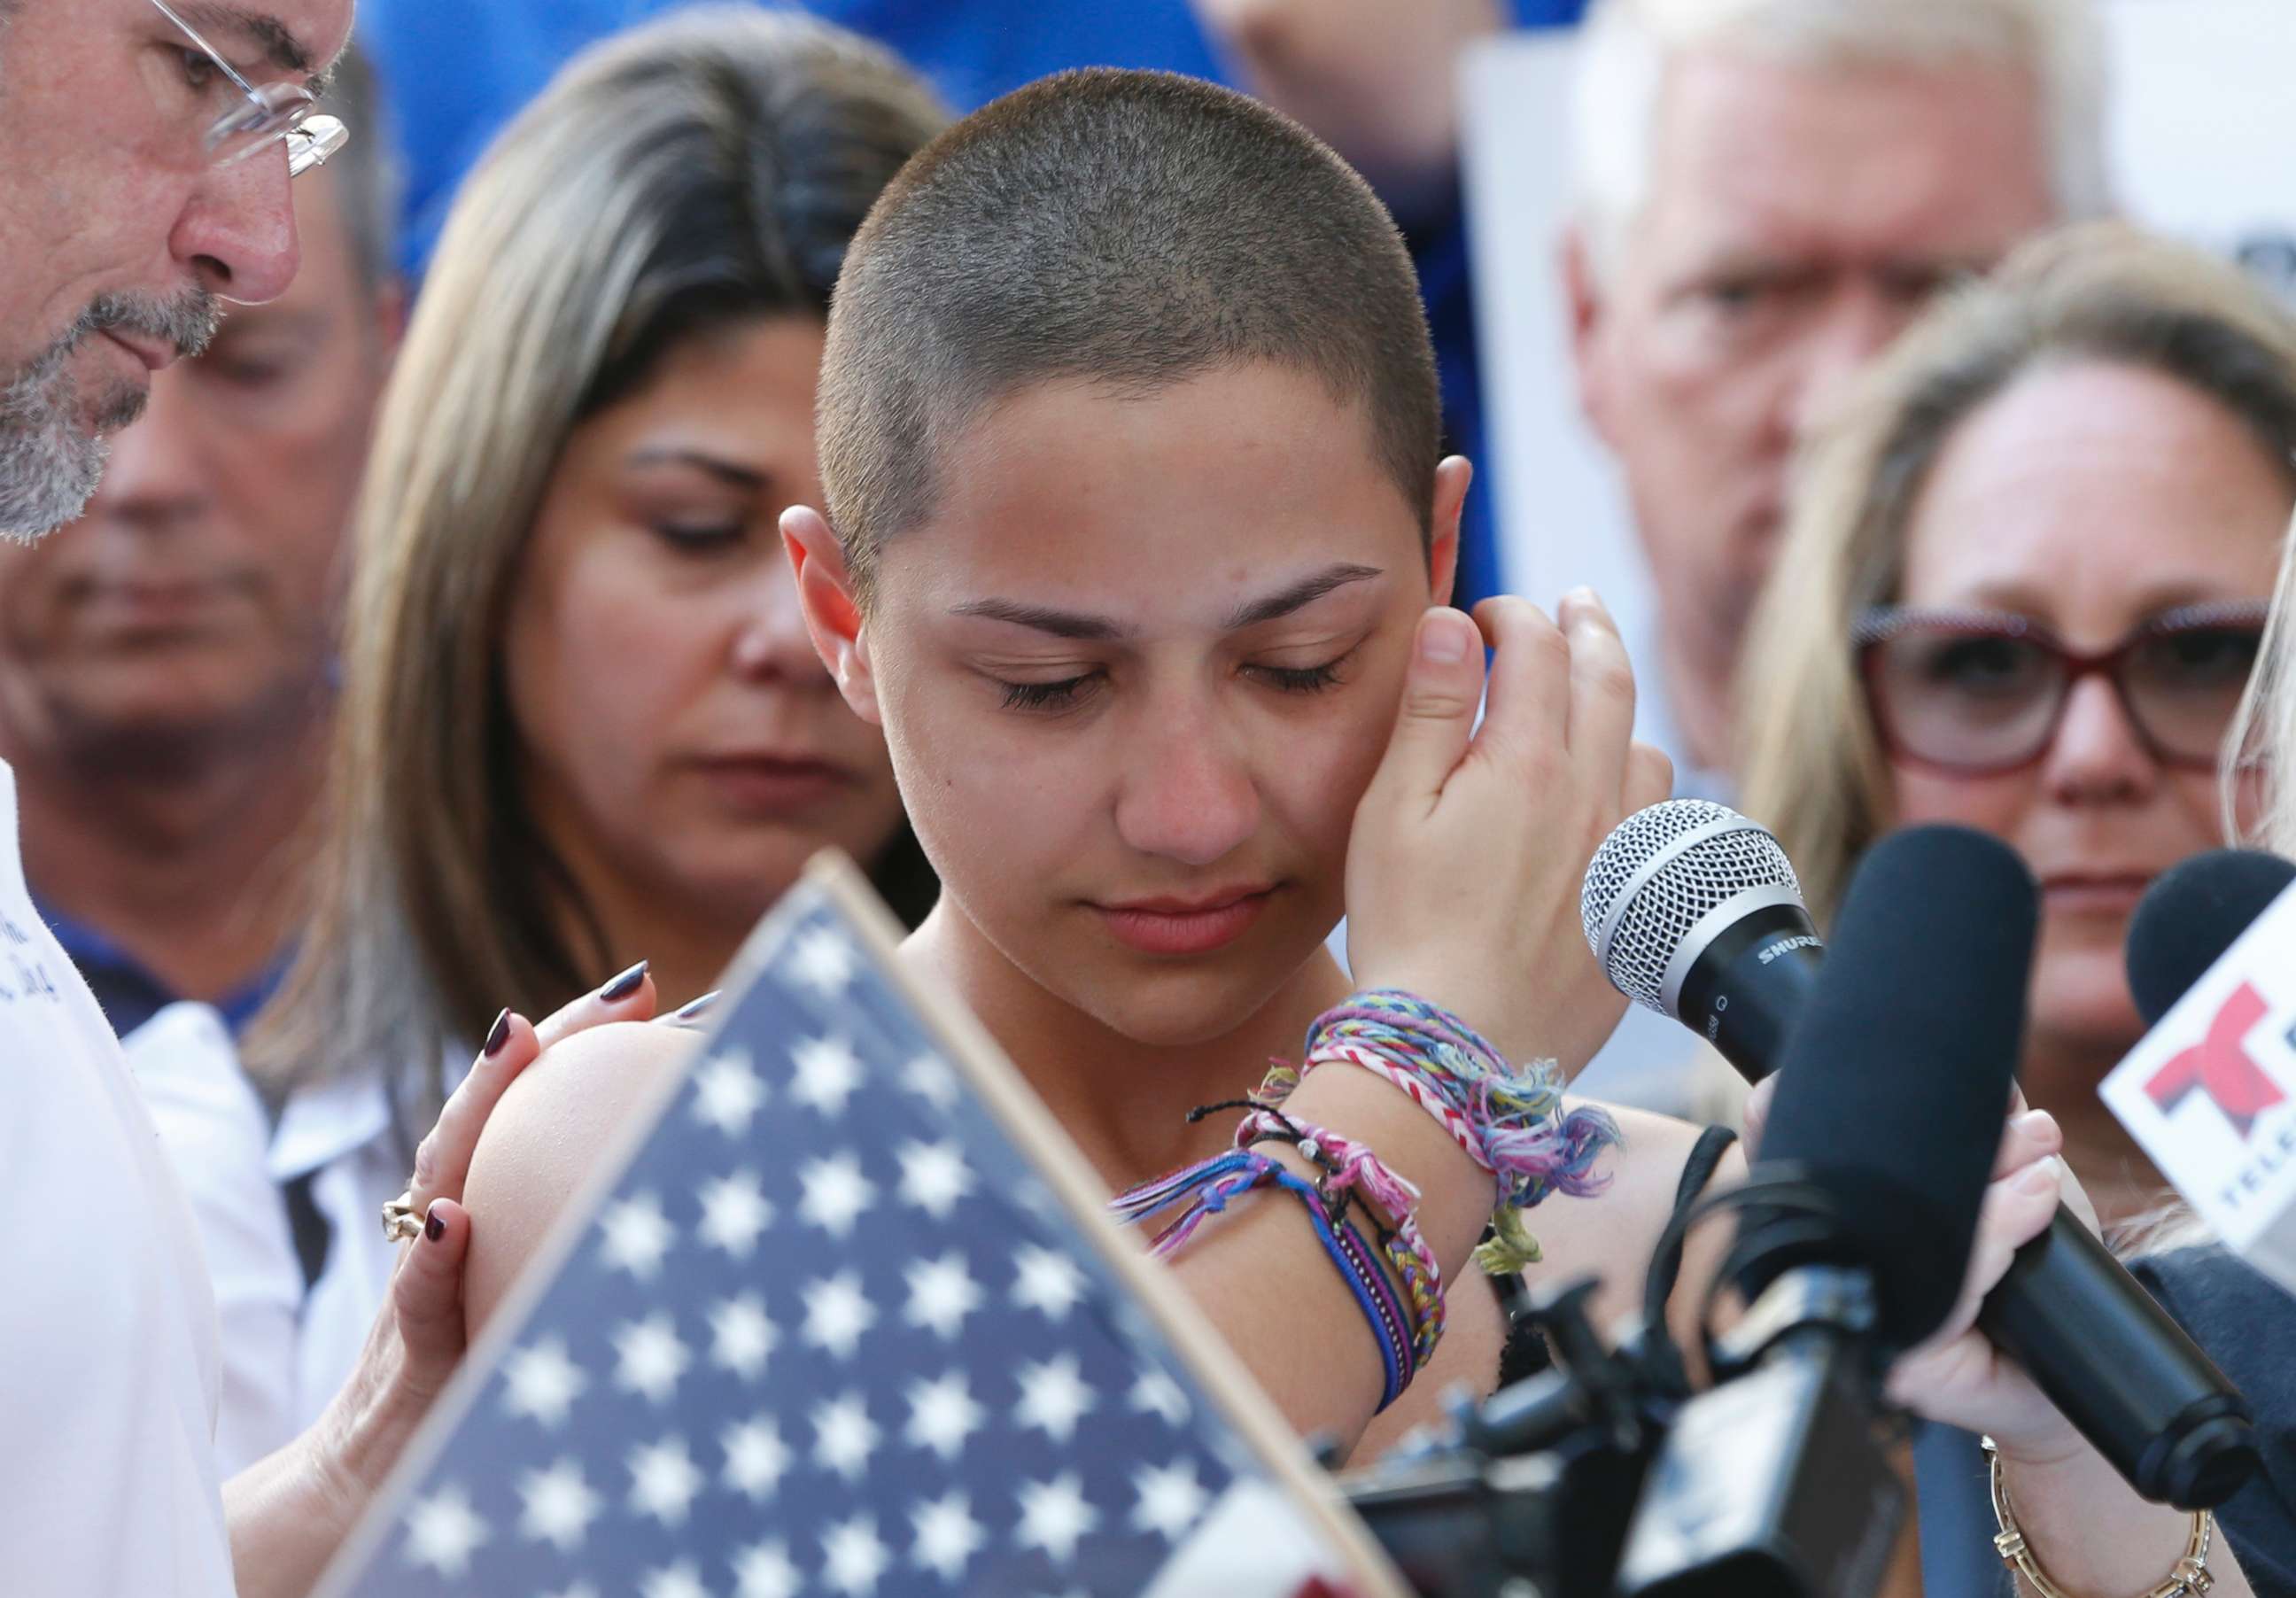 PHOTO: Marjory Stoneman Douglas High School student Emma Gonzalez speaks at a rally for gun control at the Broward County Federal Courthouse in Fort Lauderdale, Fla., Feb. 17, 2018.